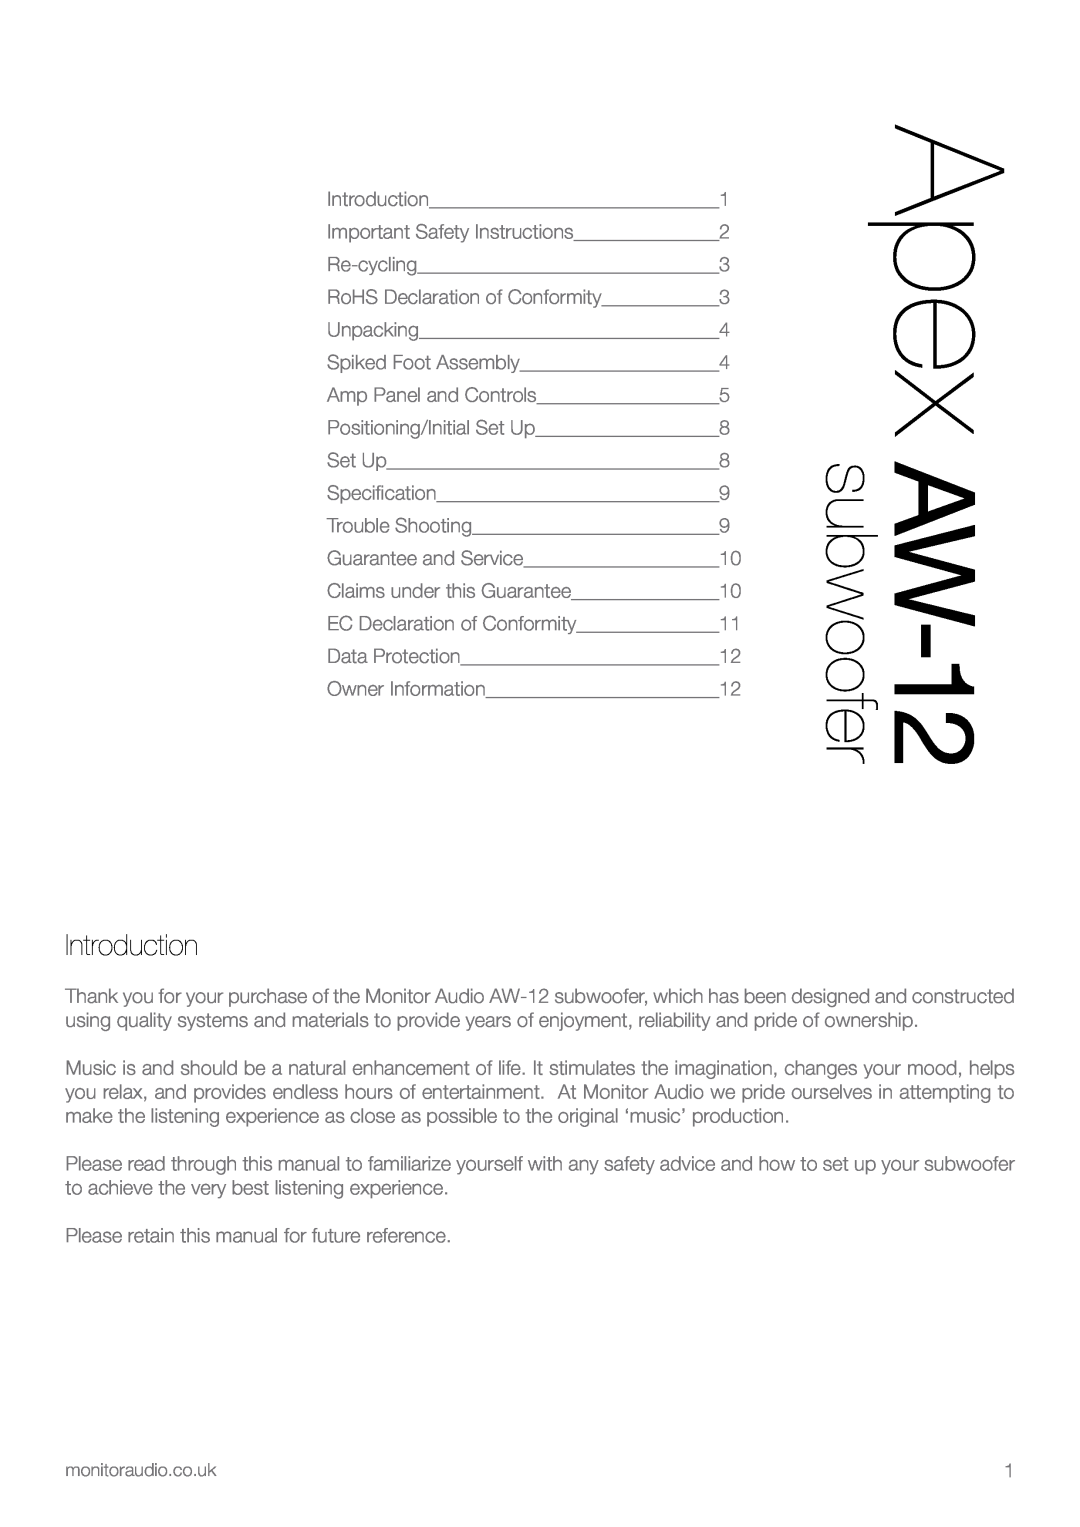 Apex Digital AW-12 owner manual Introduction 